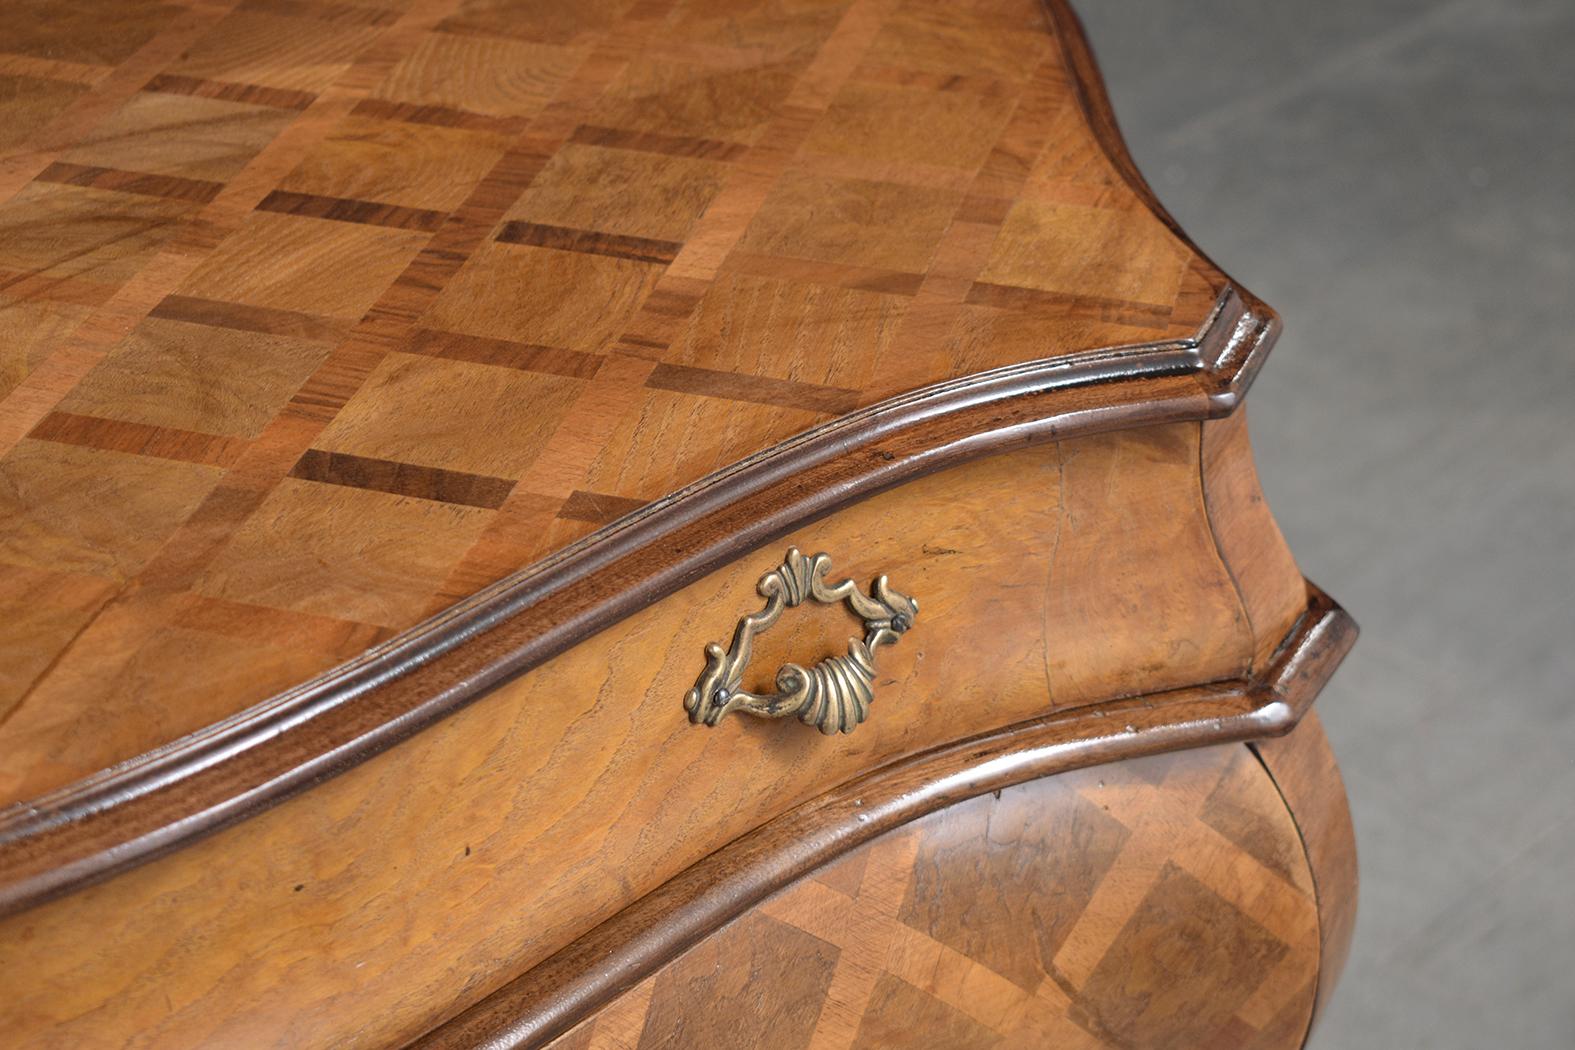 Mid-20th Century Italian Vintage Commode: Restored Wood and Marquetry Veneer Bombay Chest